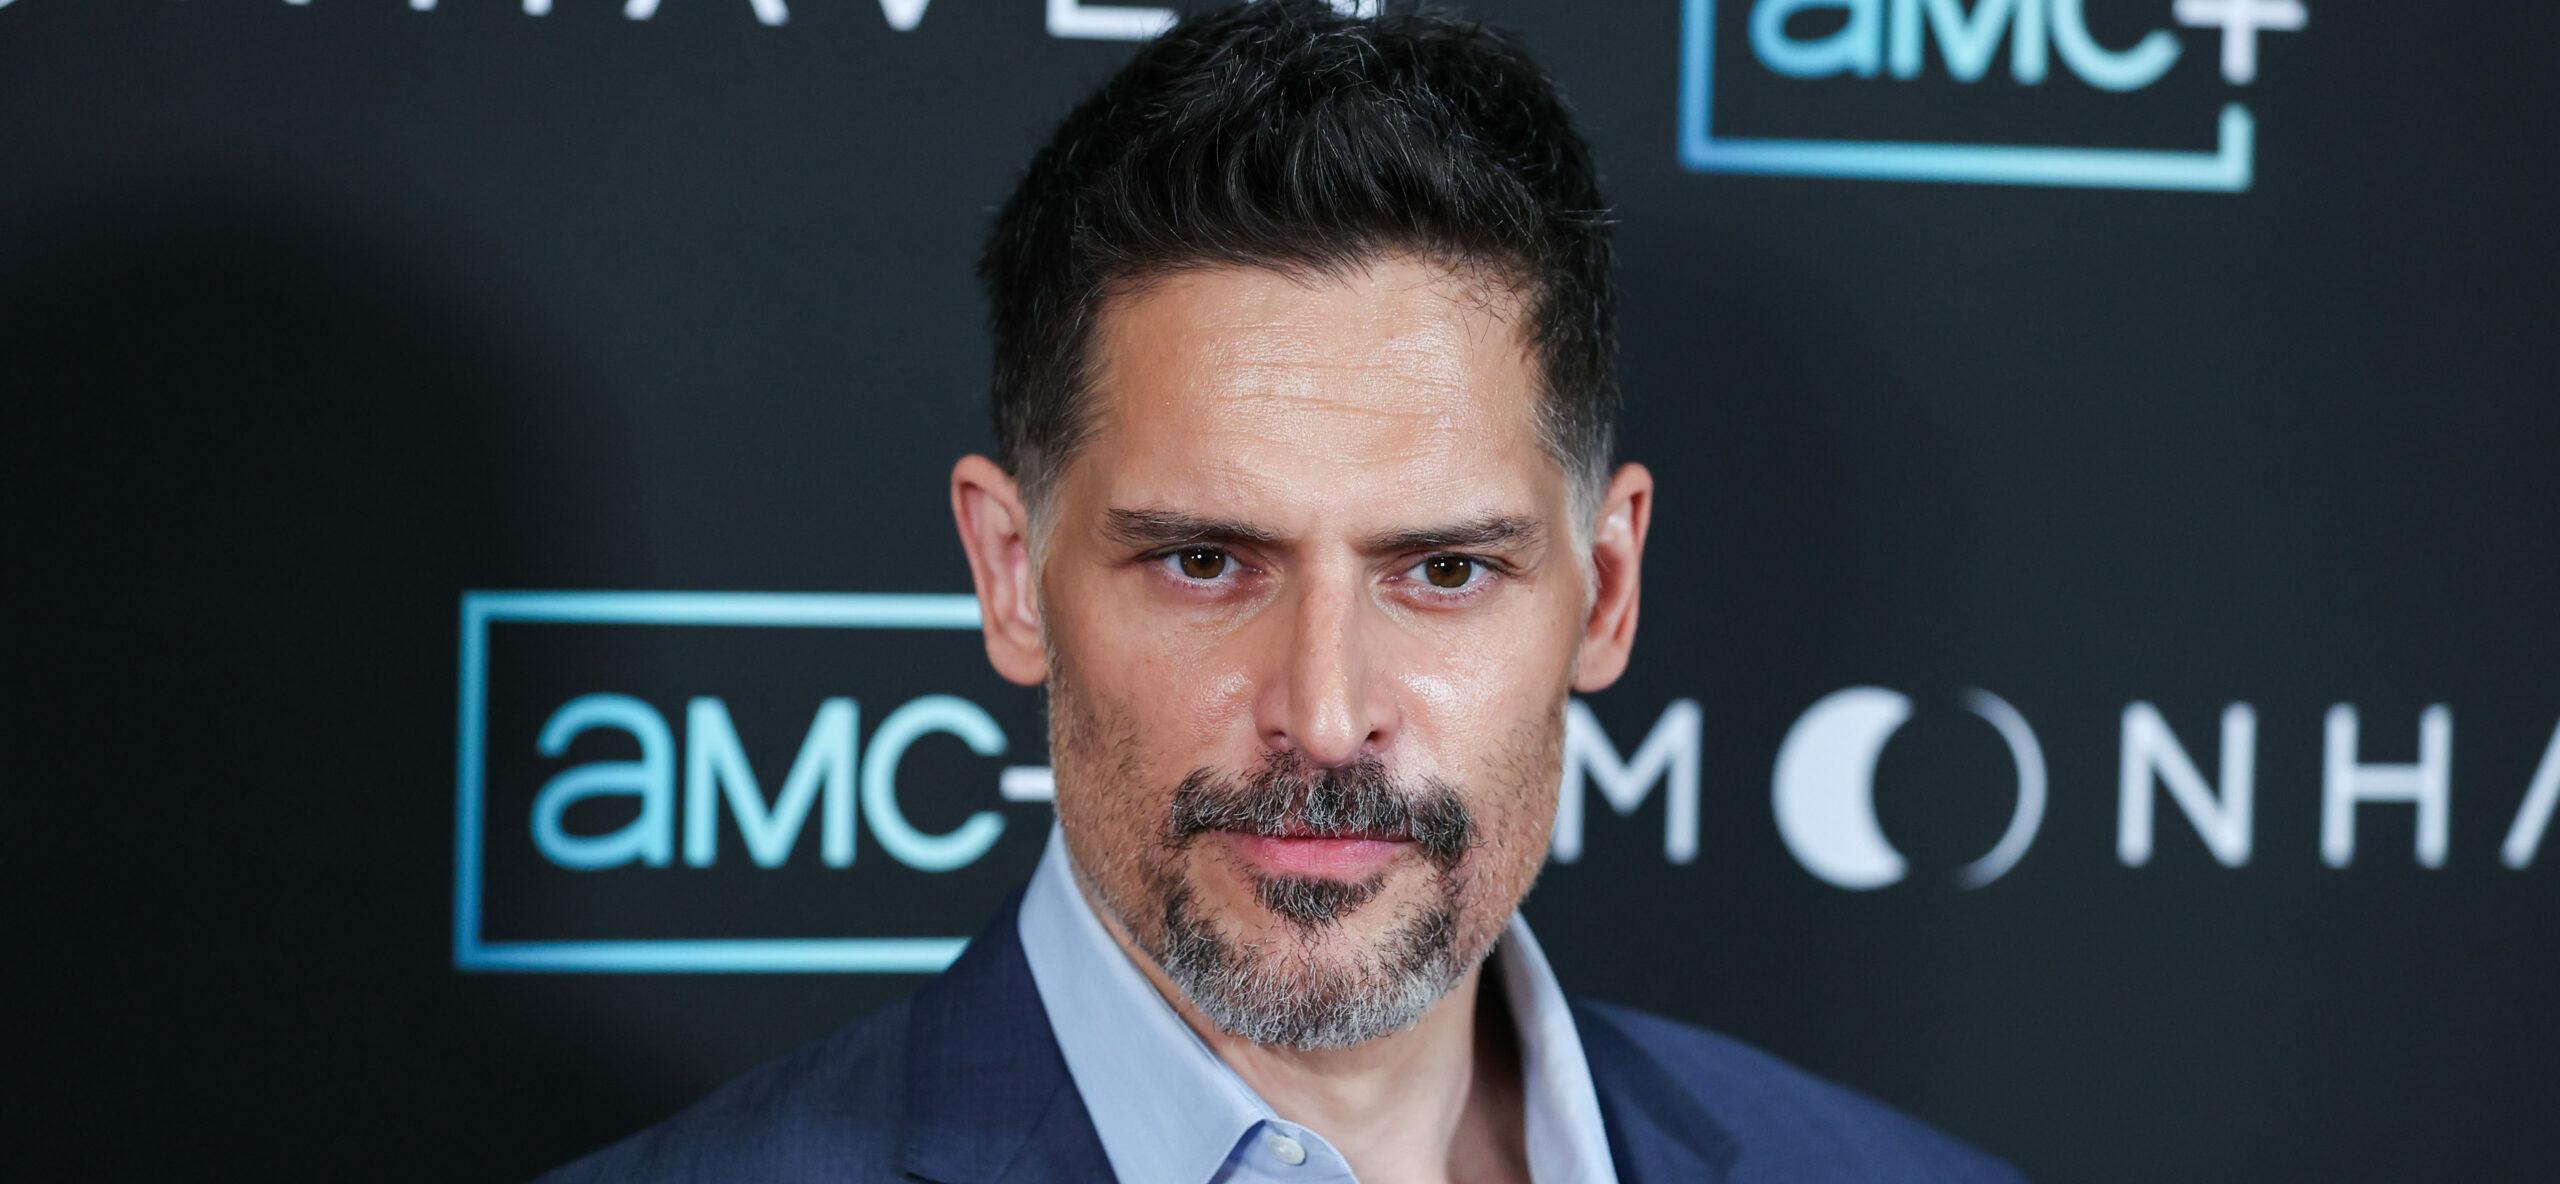 Joe Manganiello Learns He’s Part-Black And Is Actually Not A Manganiello After DNA Testing